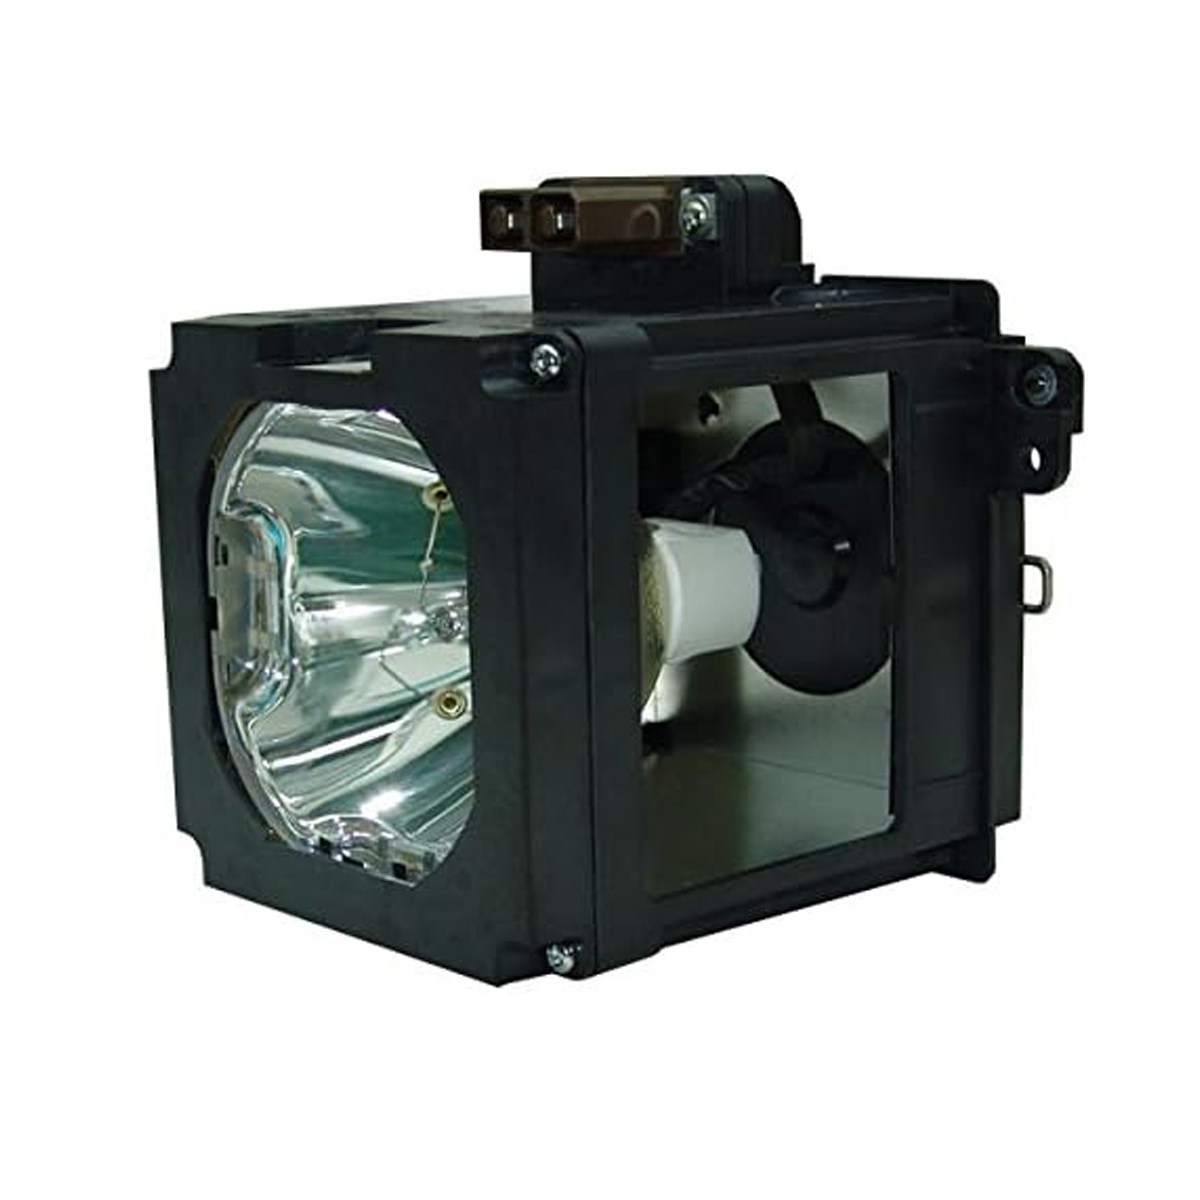 Replacement Projector lamp PJL-327 For YAMAHA DPX 1000